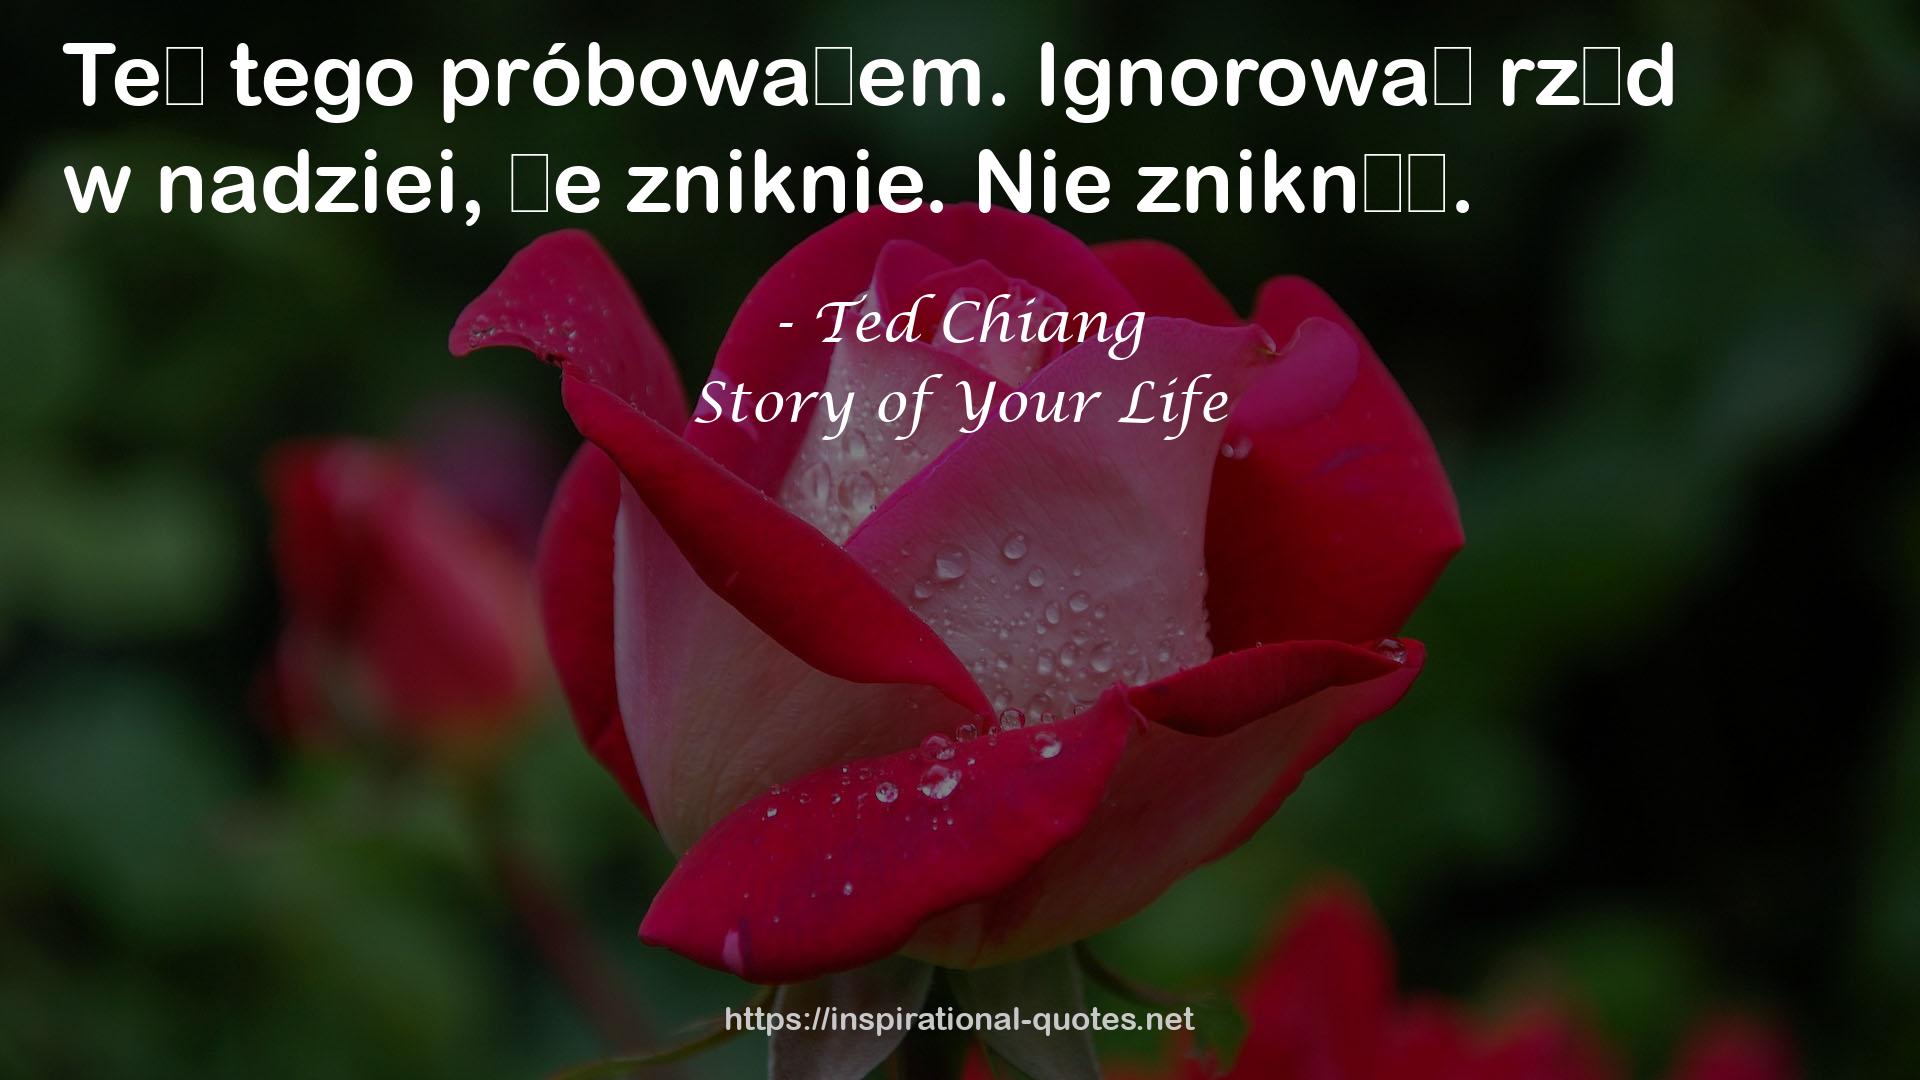 Story of Your Life QUOTES